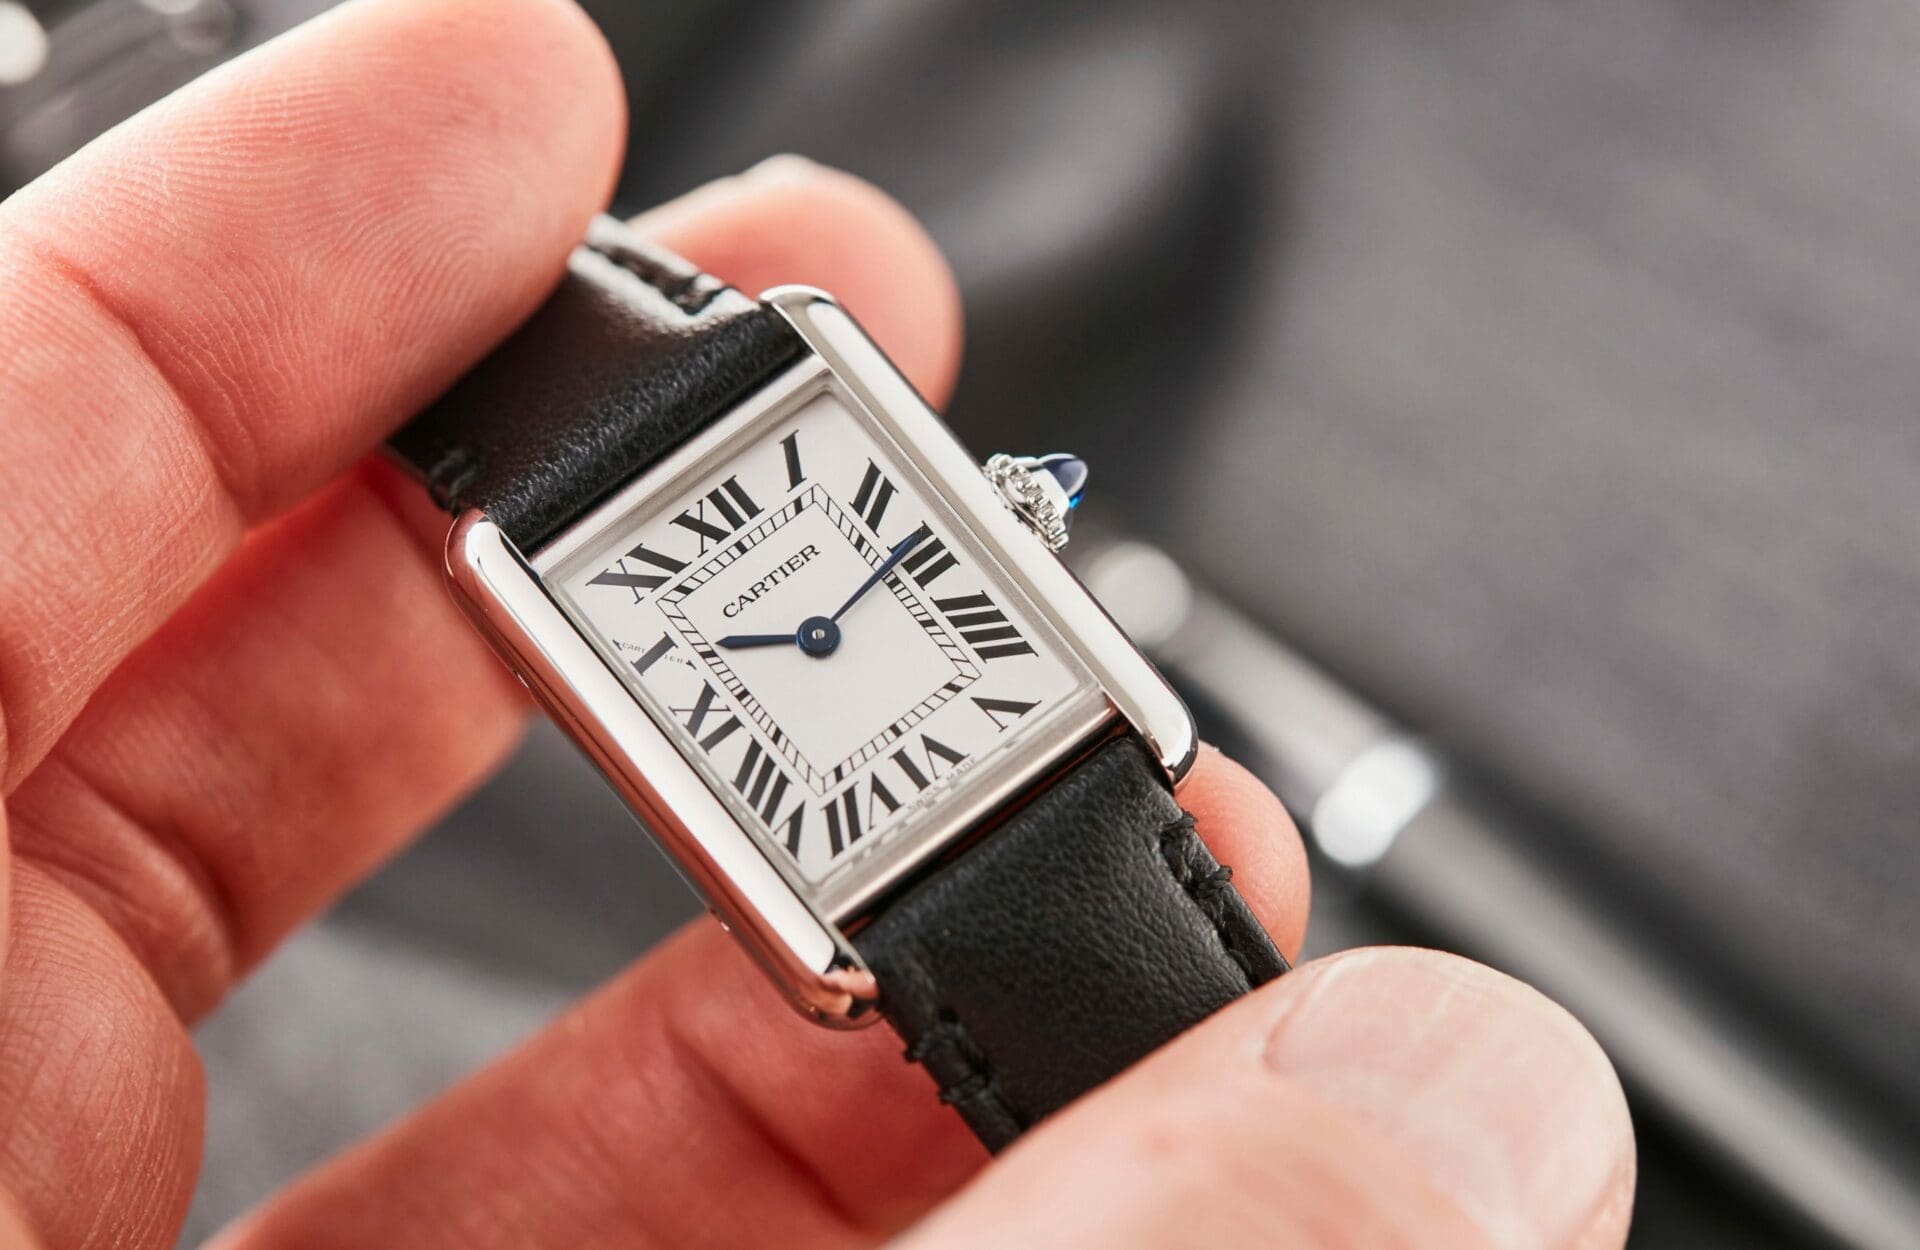 The Cartier Tank Must Collection offers classic design at an accessible  price